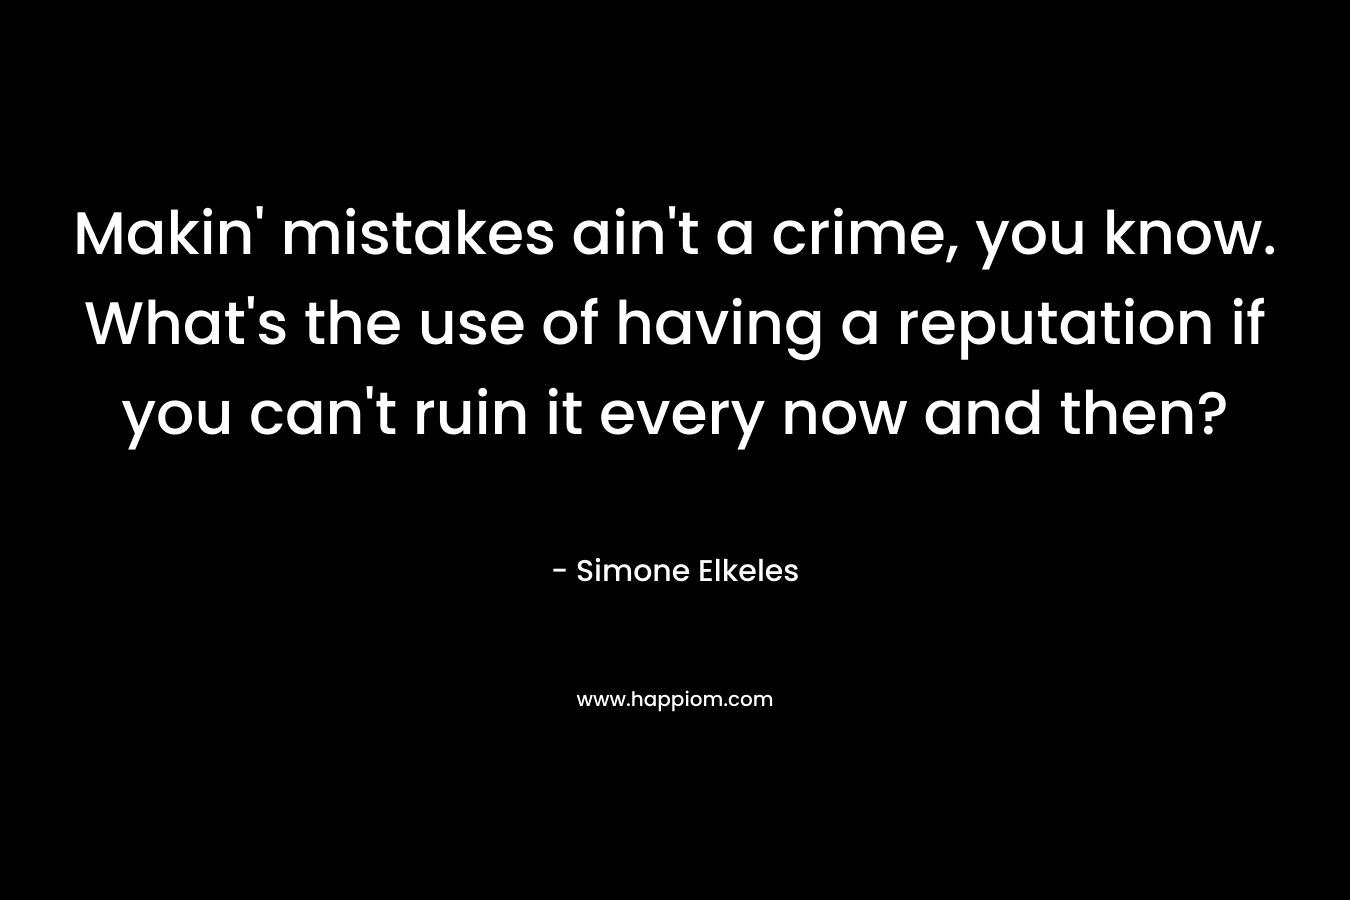 Makin’ mistakes ain’t a crime, you know. What’s the use of having a reputation if you can’t ruin it every now and then? – Simone Elkeles